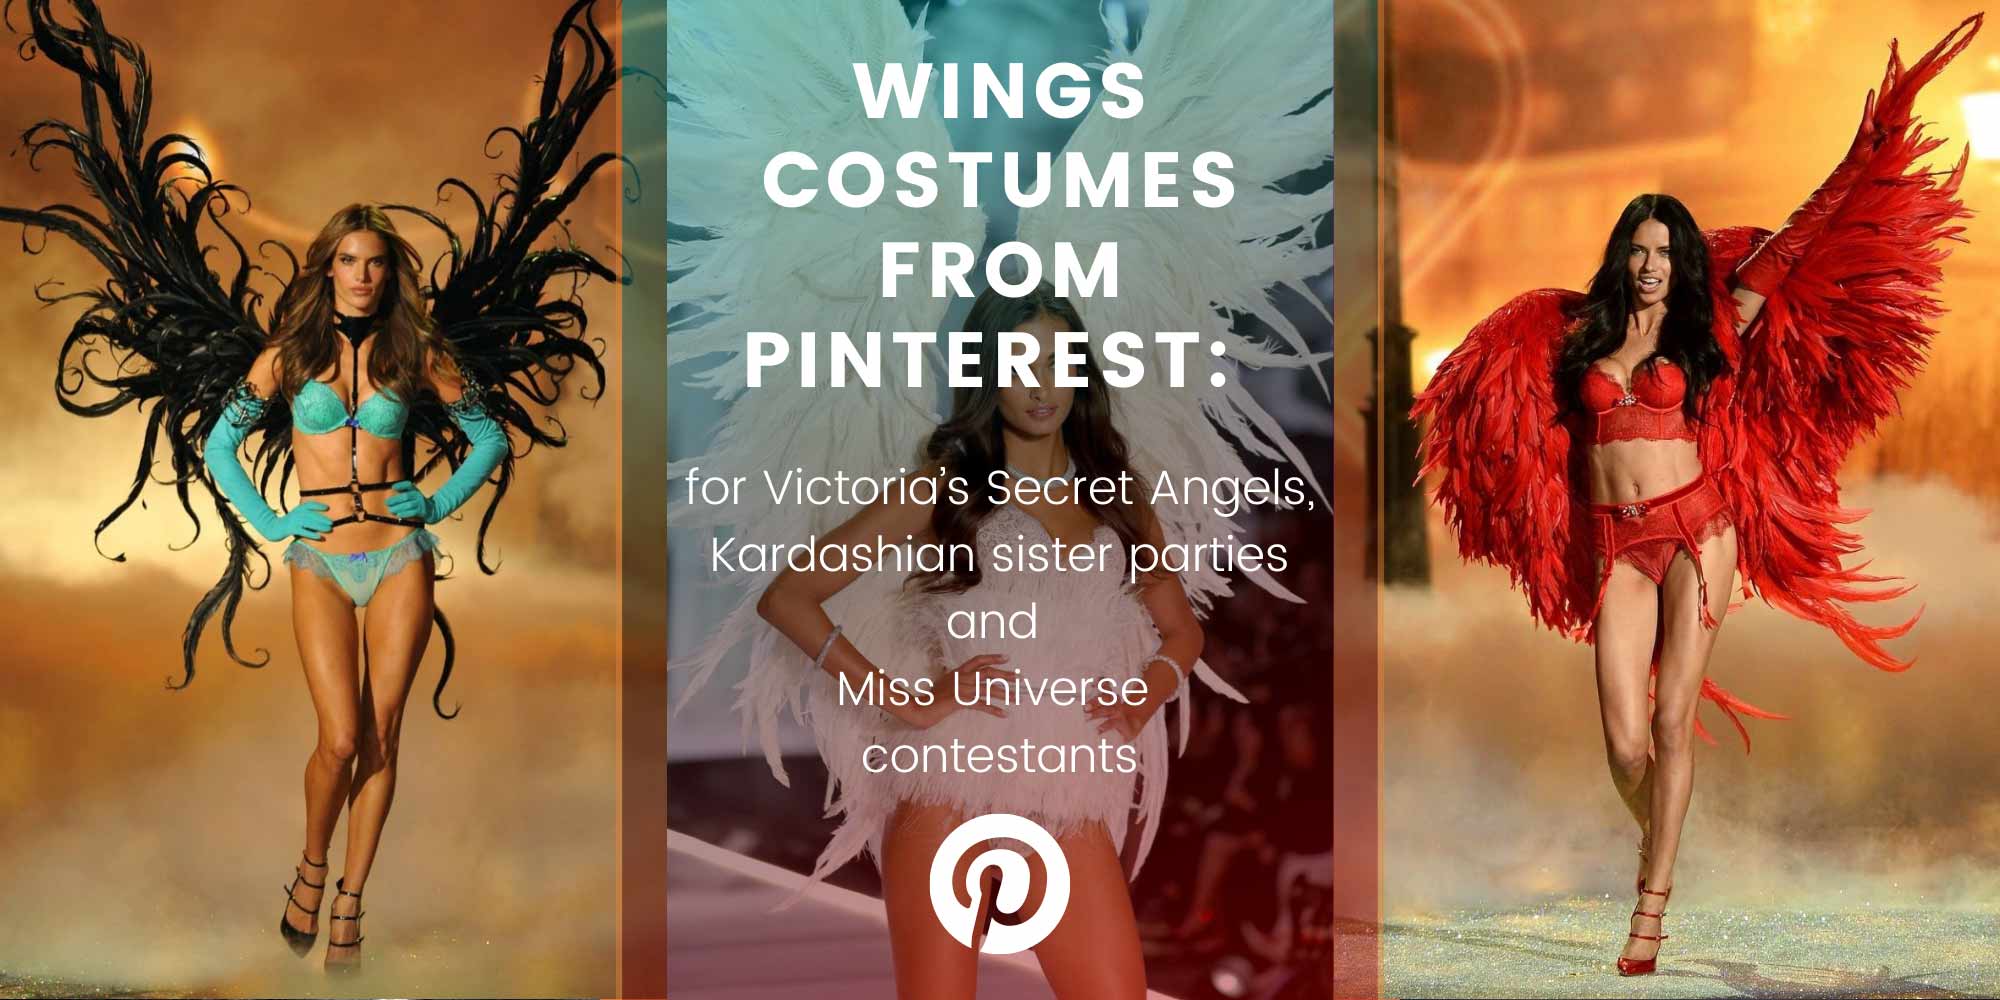 https://www.etereshop.com/wp-content/uploads/2021/06/wings-costumes_-for-Victorias-Secret-Angels-Kardashian-sisters-parties-and-Miss-Universe-contestants-1.jpg